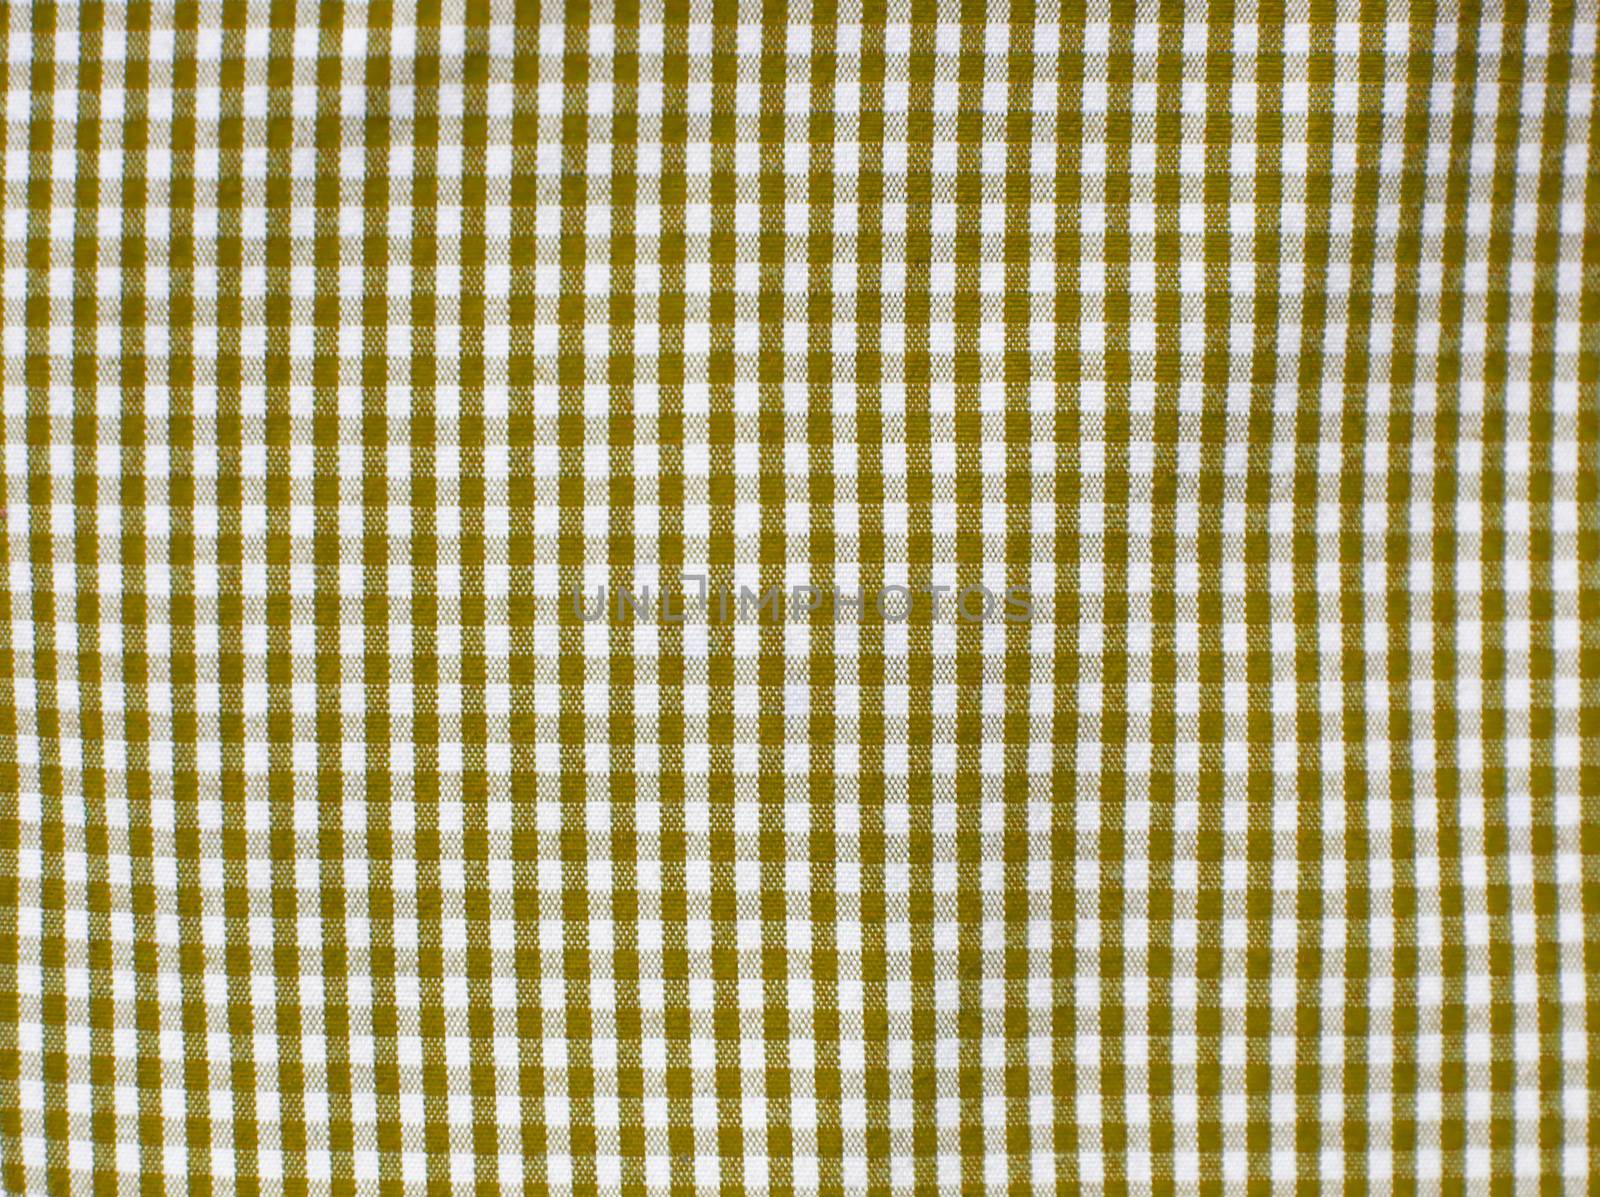 Brown square fabric pattern for background